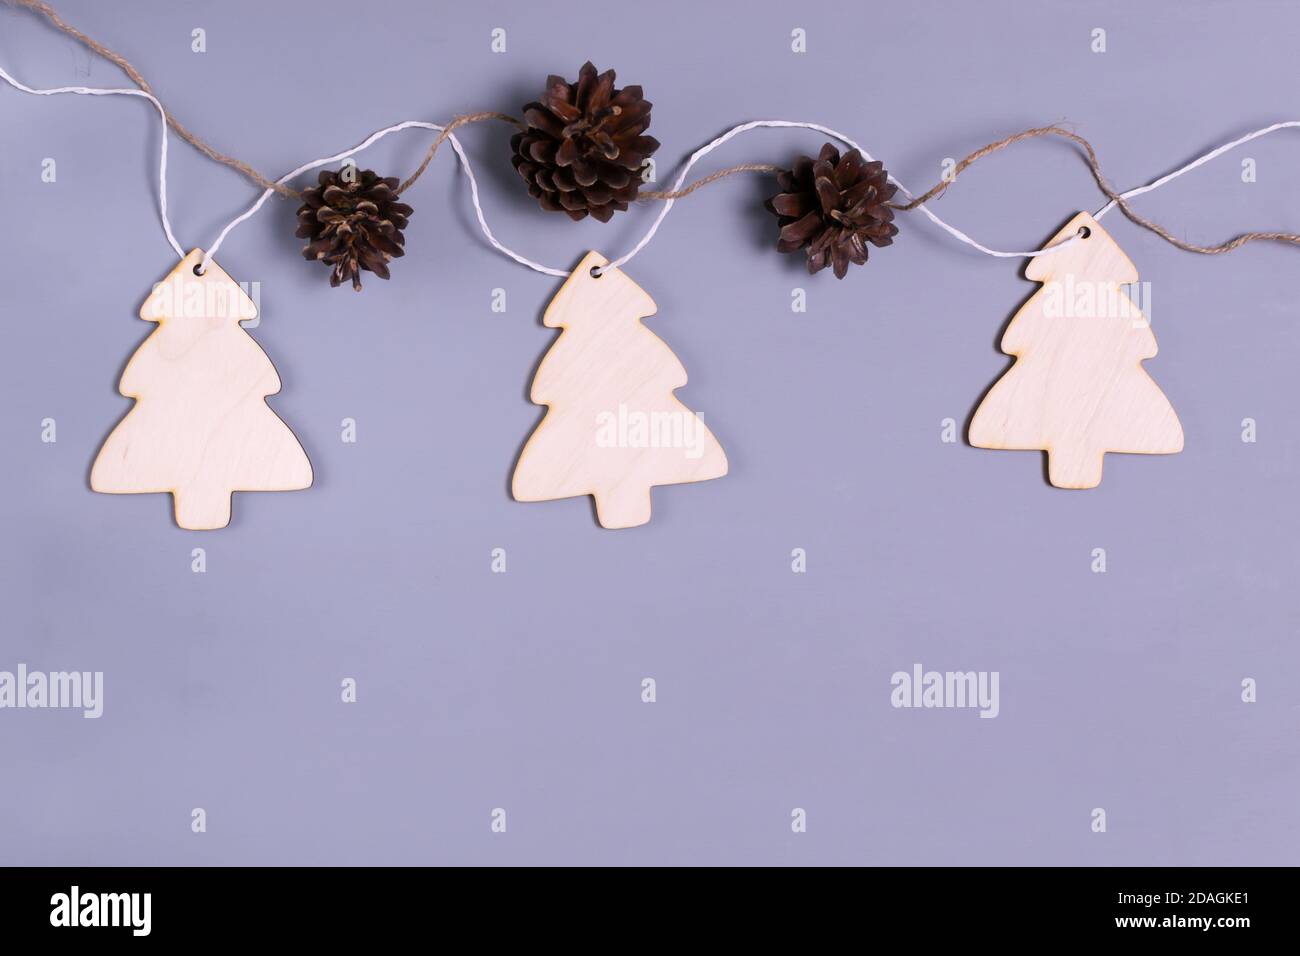 New Year's garland of Wooden trees and cones on a gray background. Natural Christmas decor concept. Copy space. Top view. Stock Photo